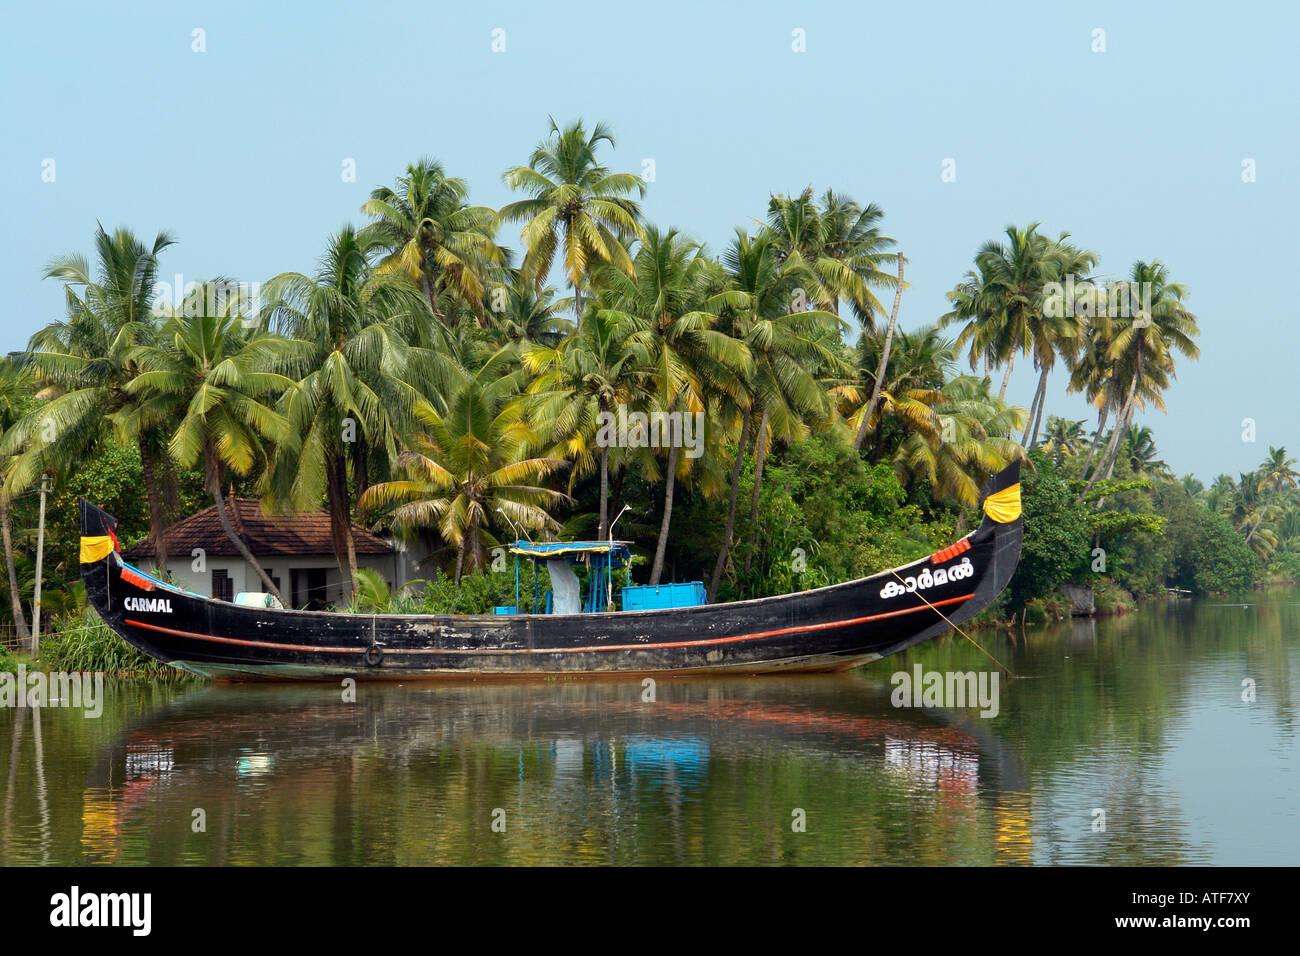 Traditional Indian Fishing Boat On The Kerala Backwaters South India